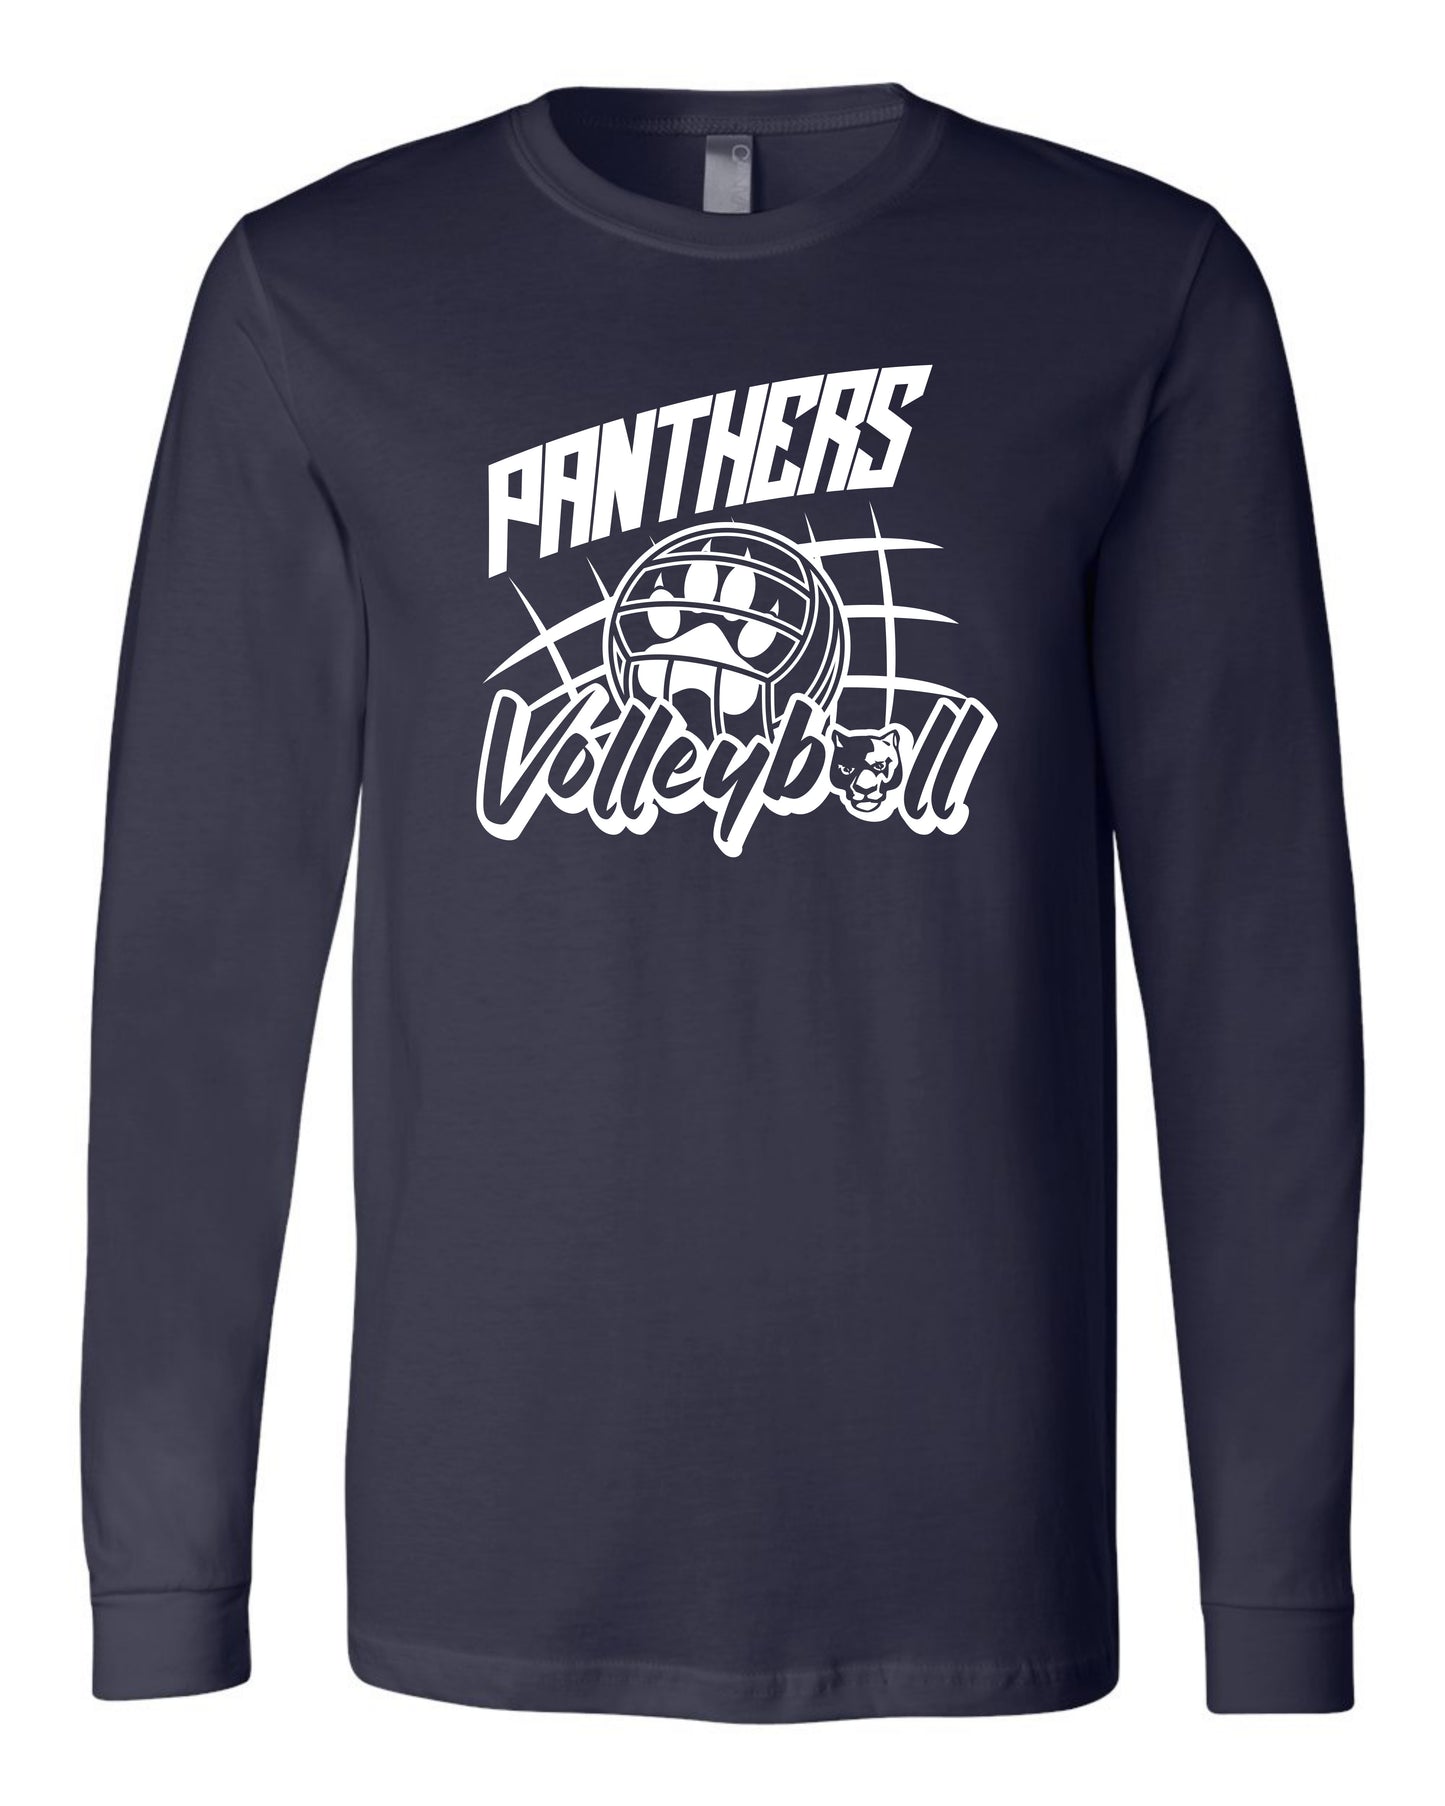 Panthers Volleyball Paw Ball - Youth Long Sleeve